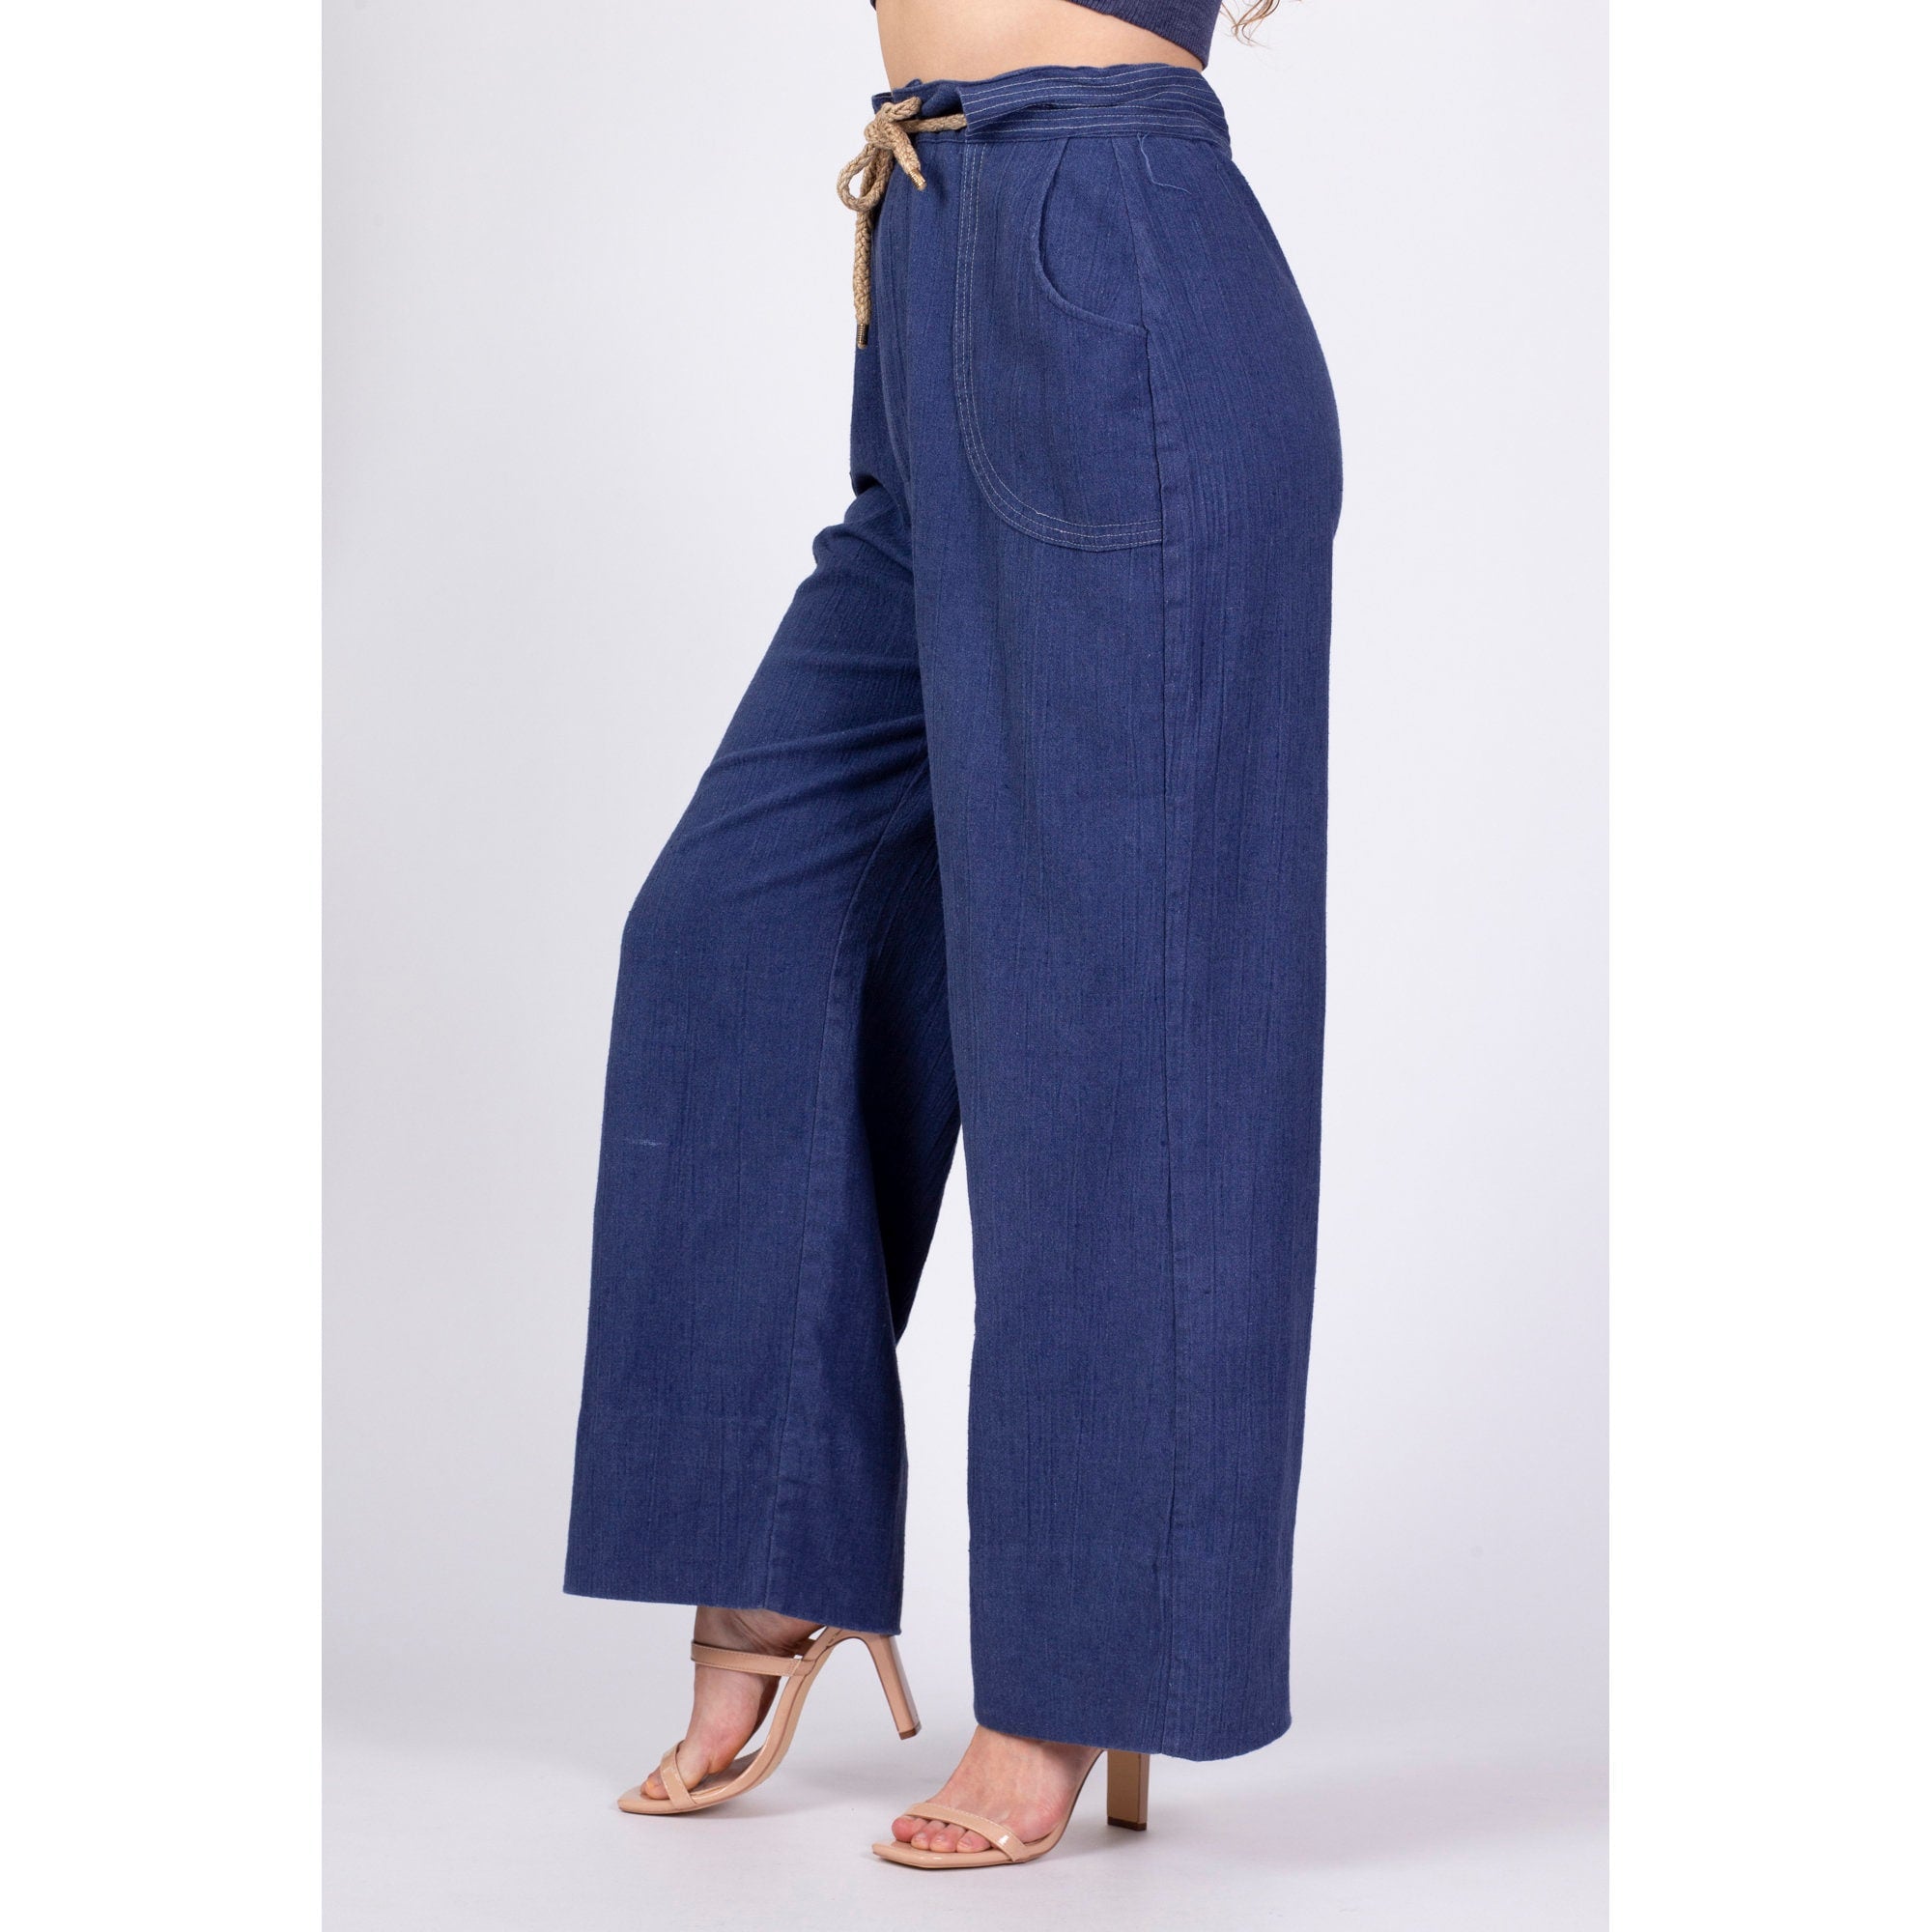 Phase Eight Jane Wide Leg Denim Look Trousers, Chambray, 12